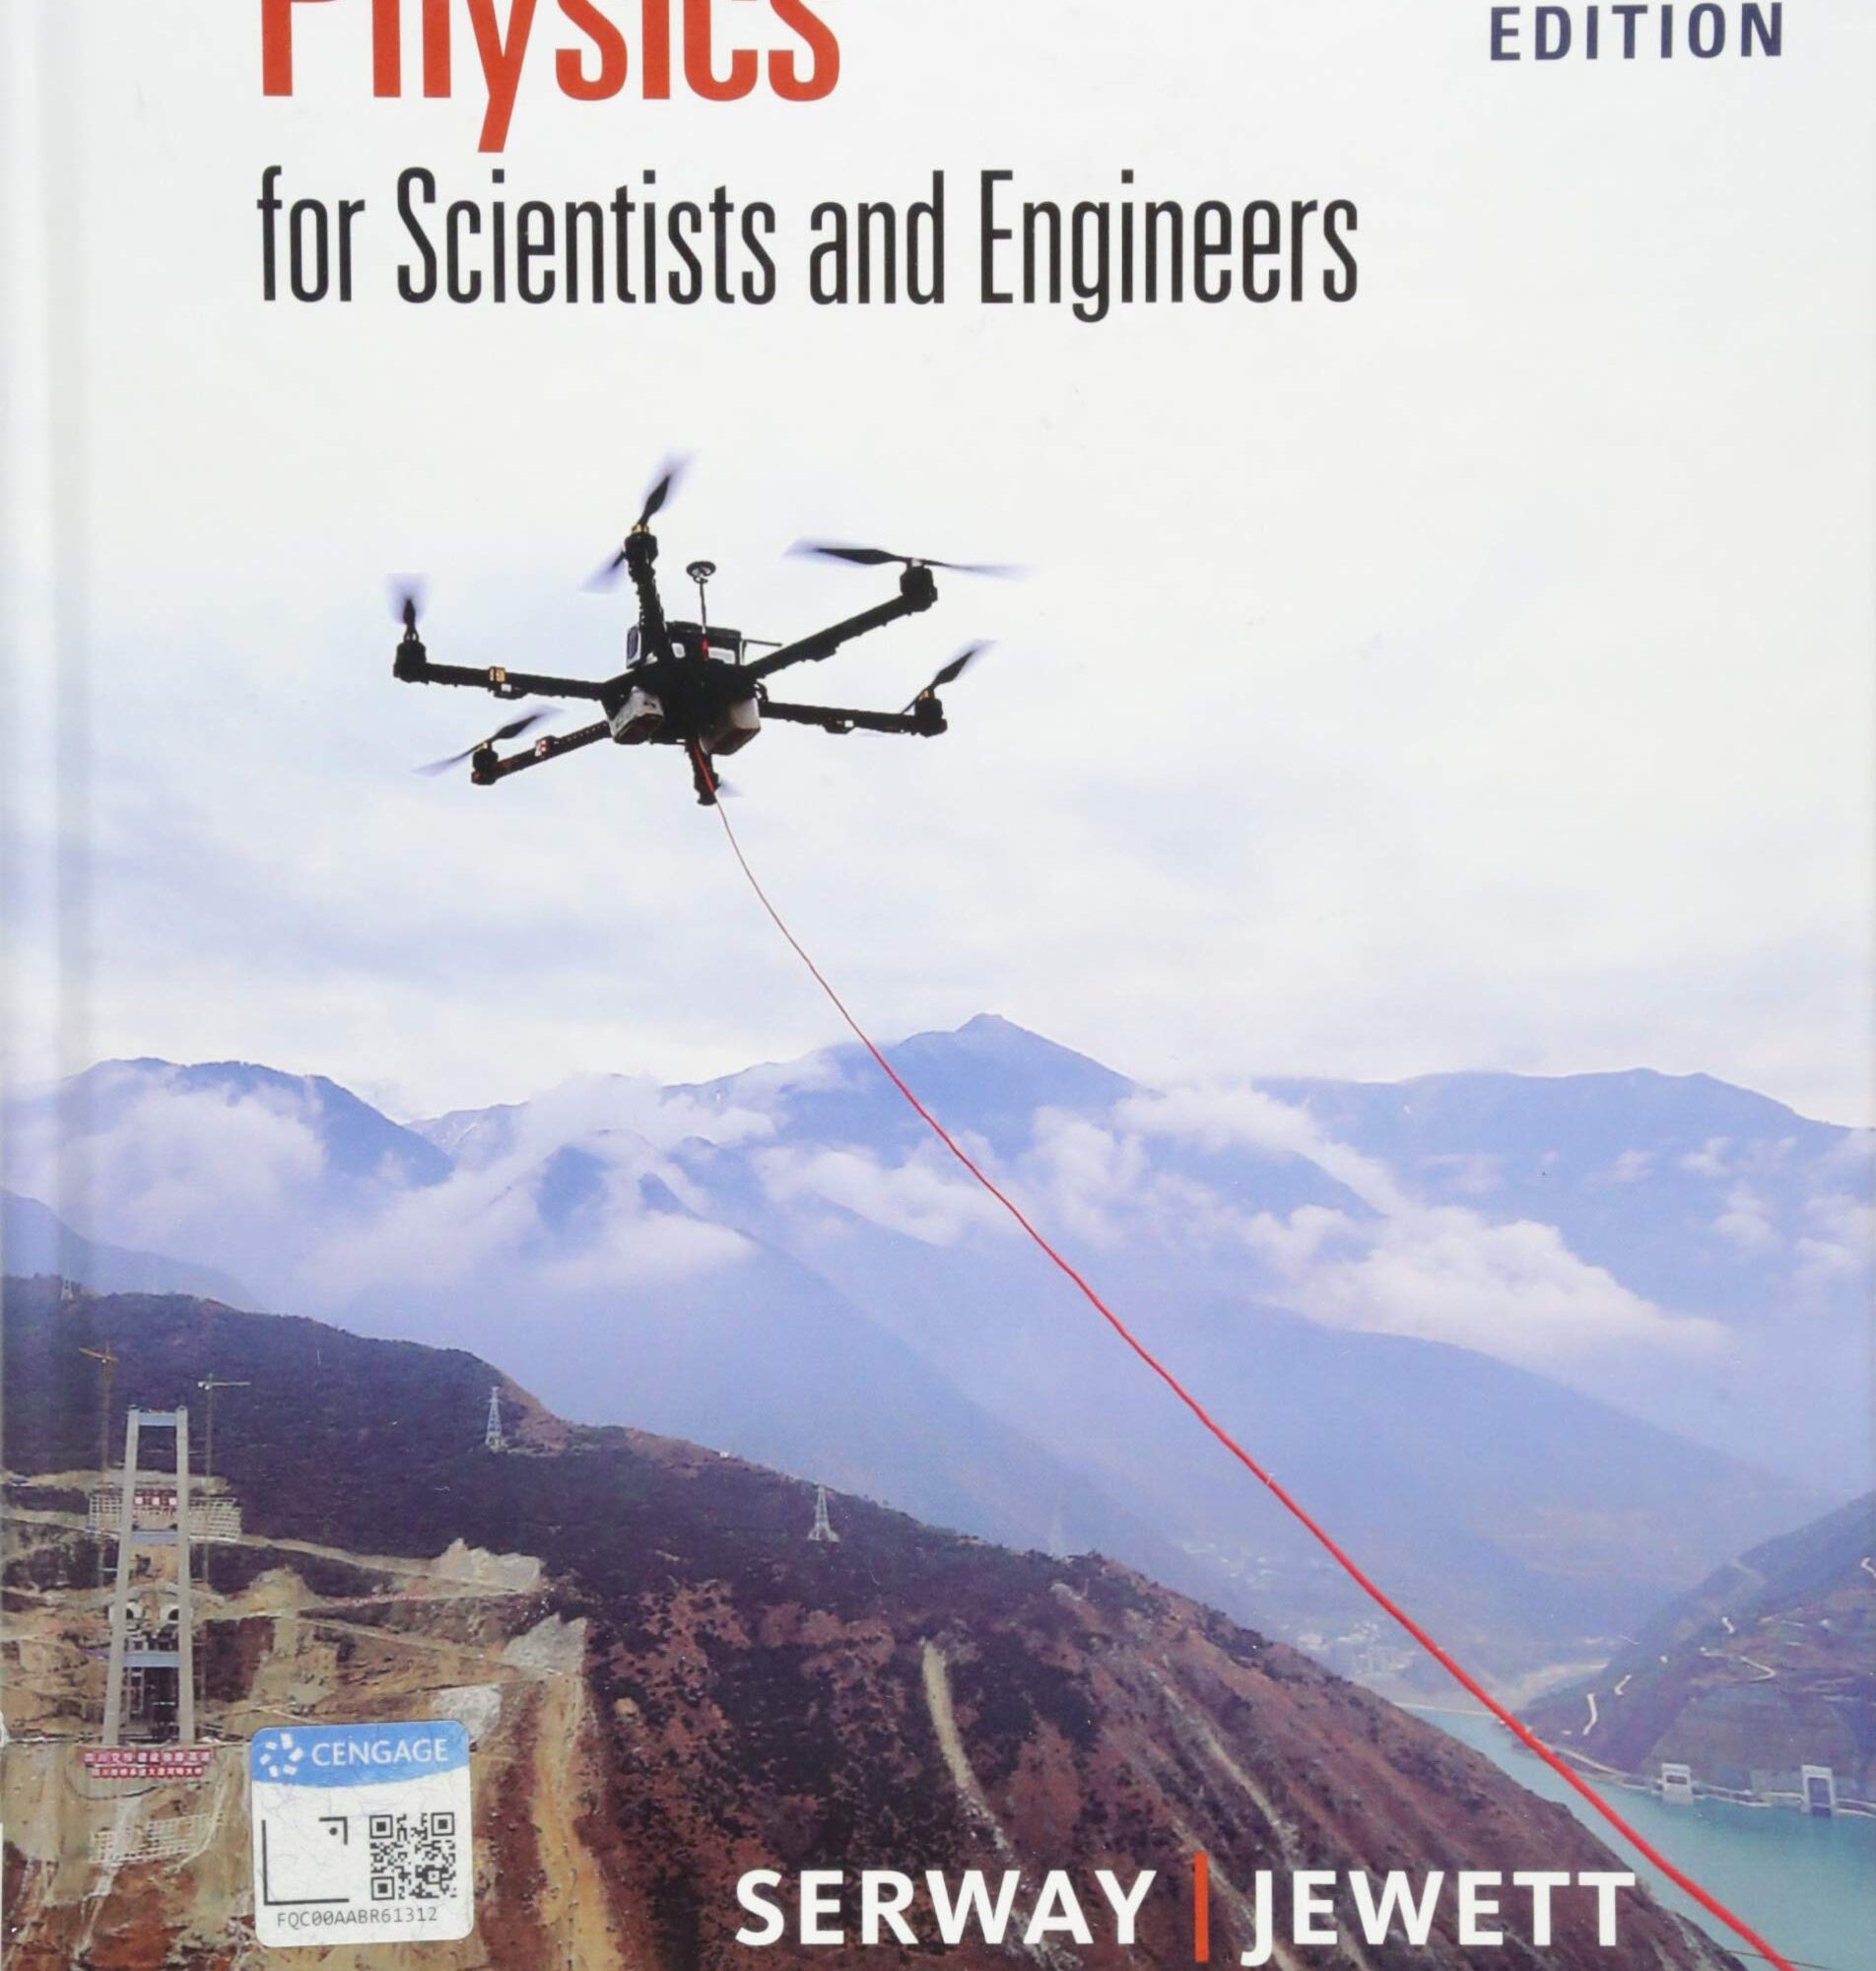 Physics for Scientists and Engineers by Raymond A. Serway (Author), John W. Jewett (Author)